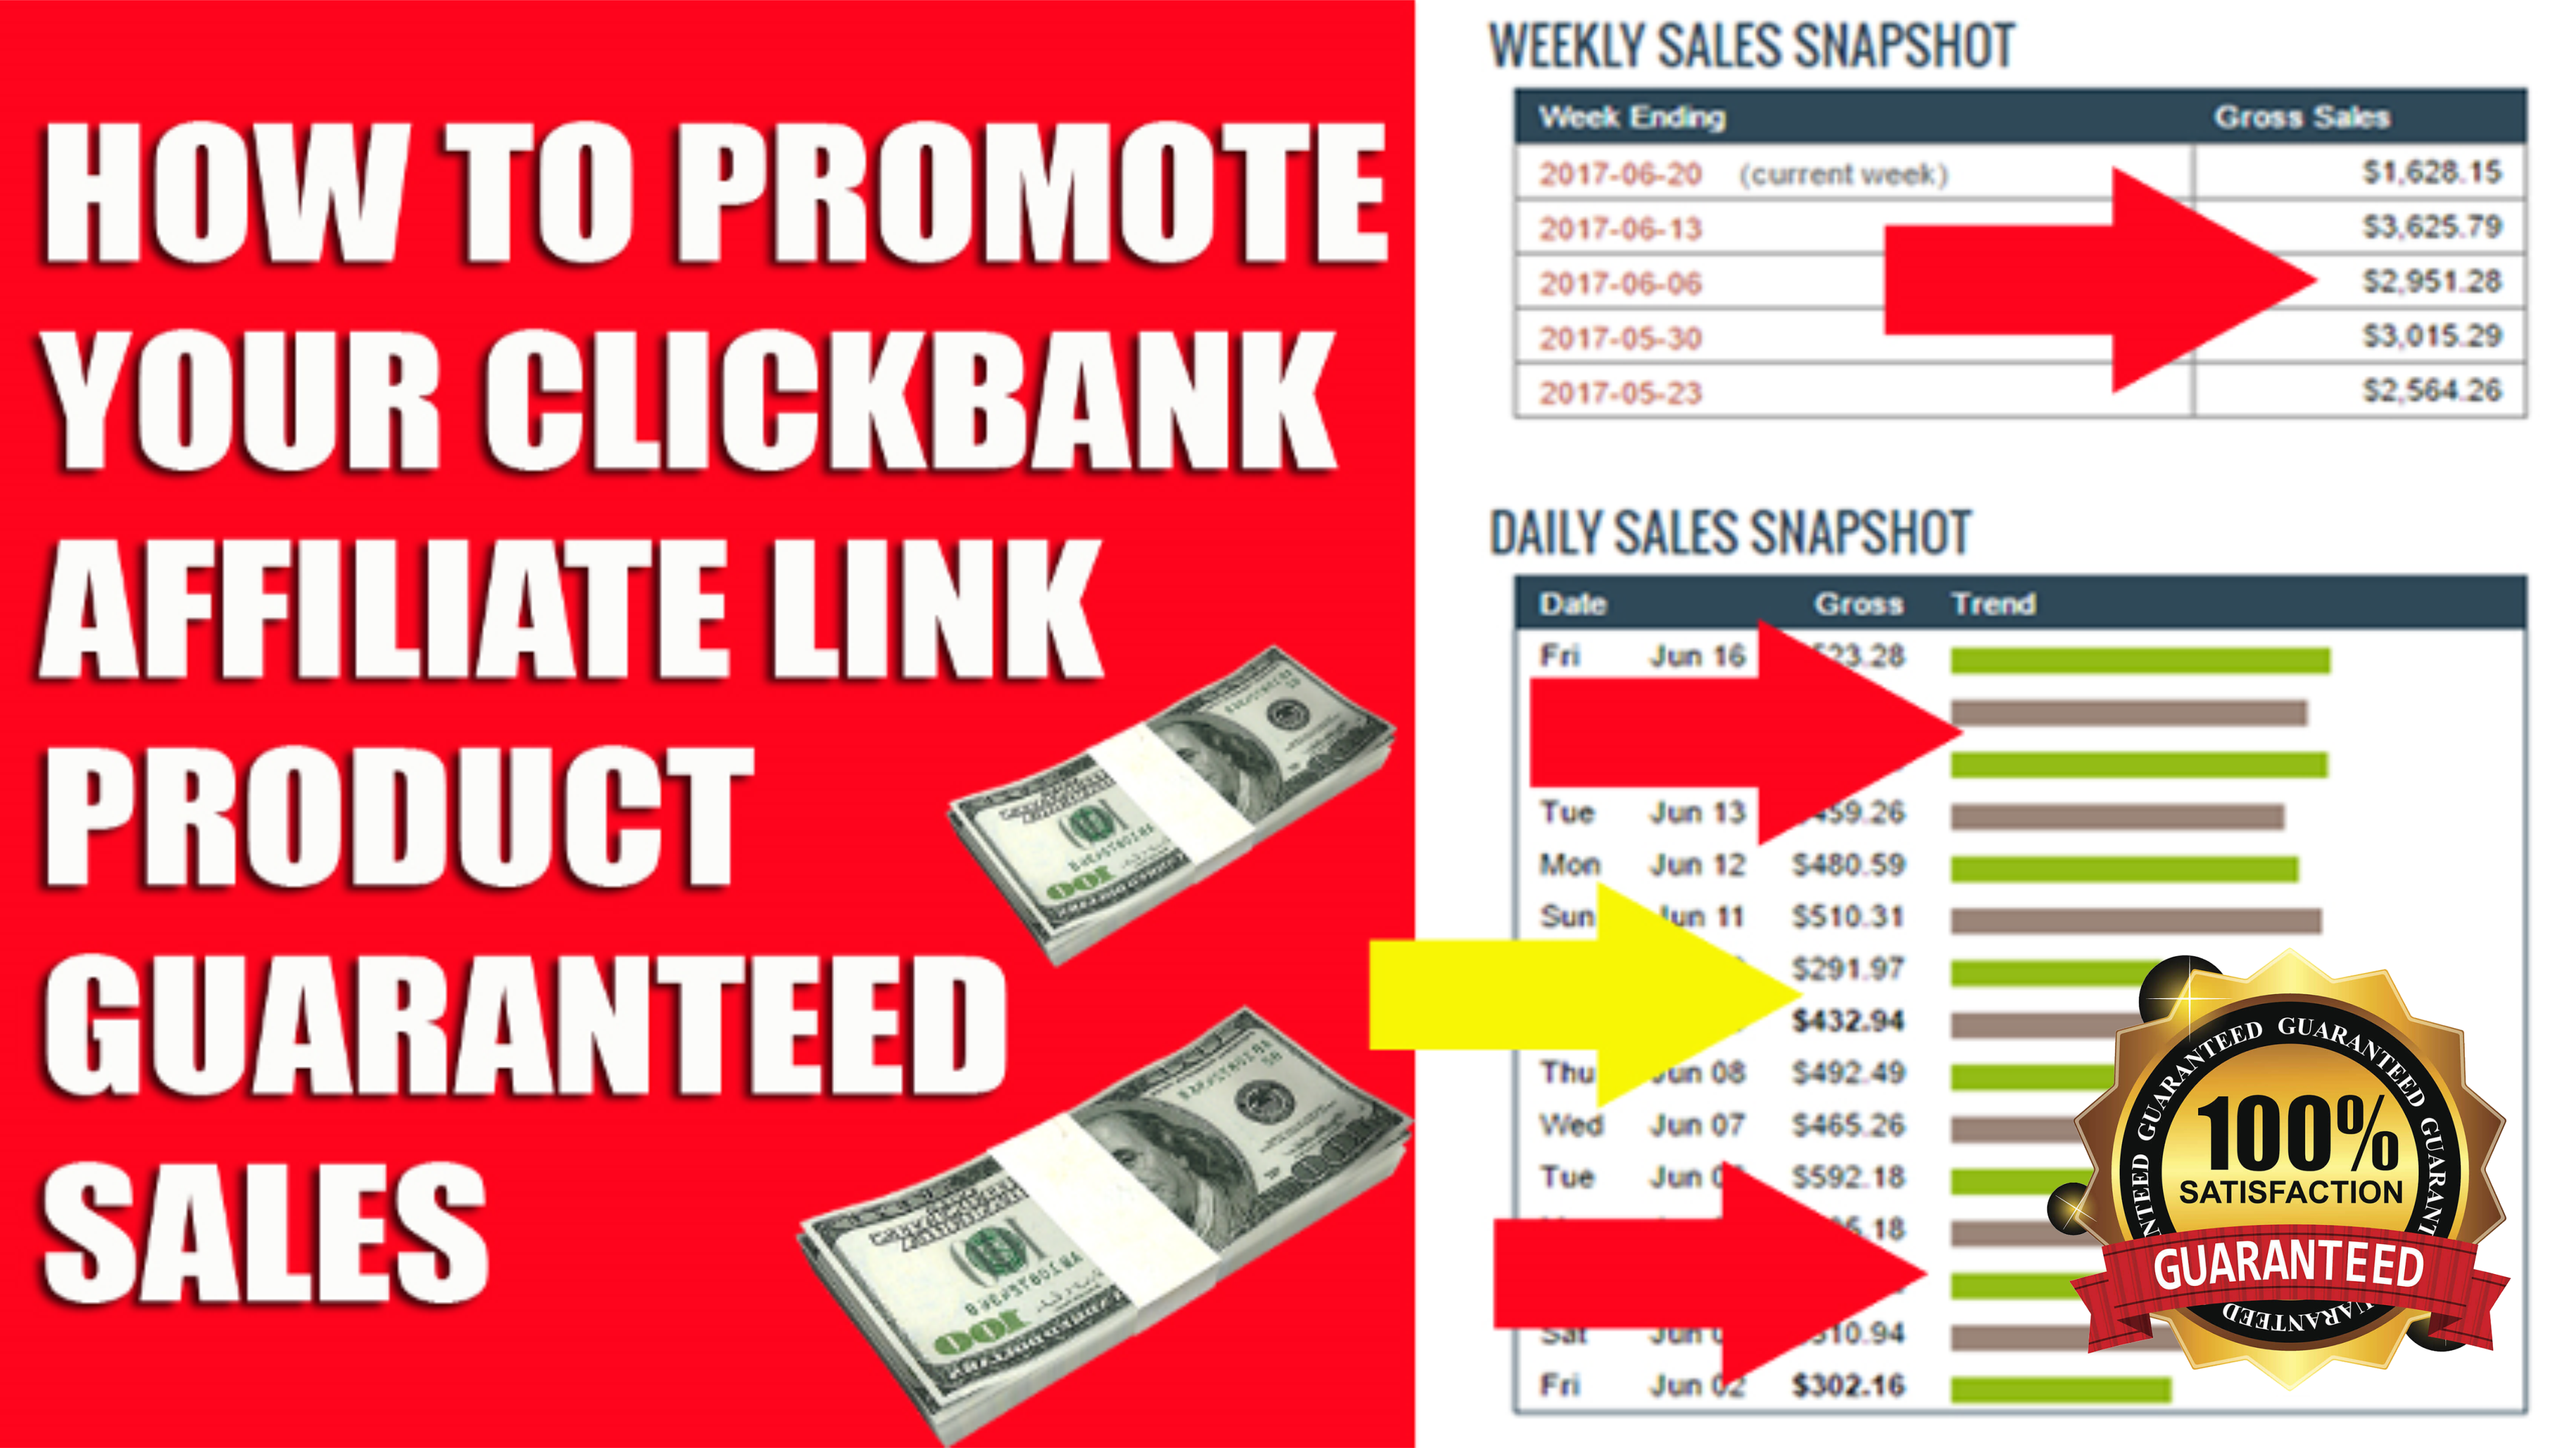 håber regering Målestok Give Top 5+ Best Traffic Source list To Promote Clickbank Product Sales  Guarantee for $15 - SEOClerks